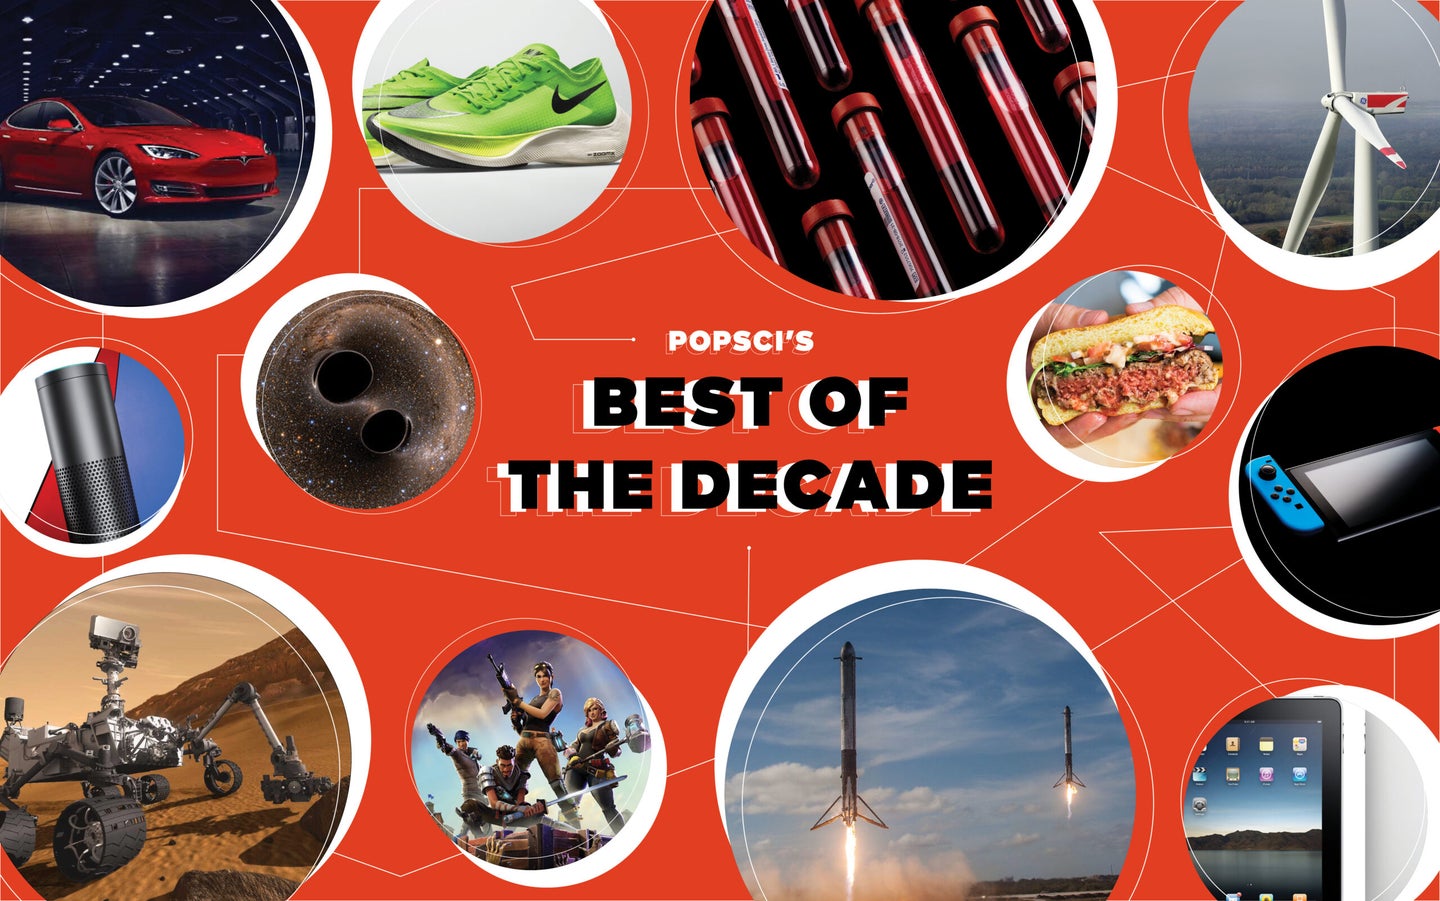 Snapshots of the best tech of the decade, including the Impossible 2.0 burger, Curiosity rover, and Fortnite video game